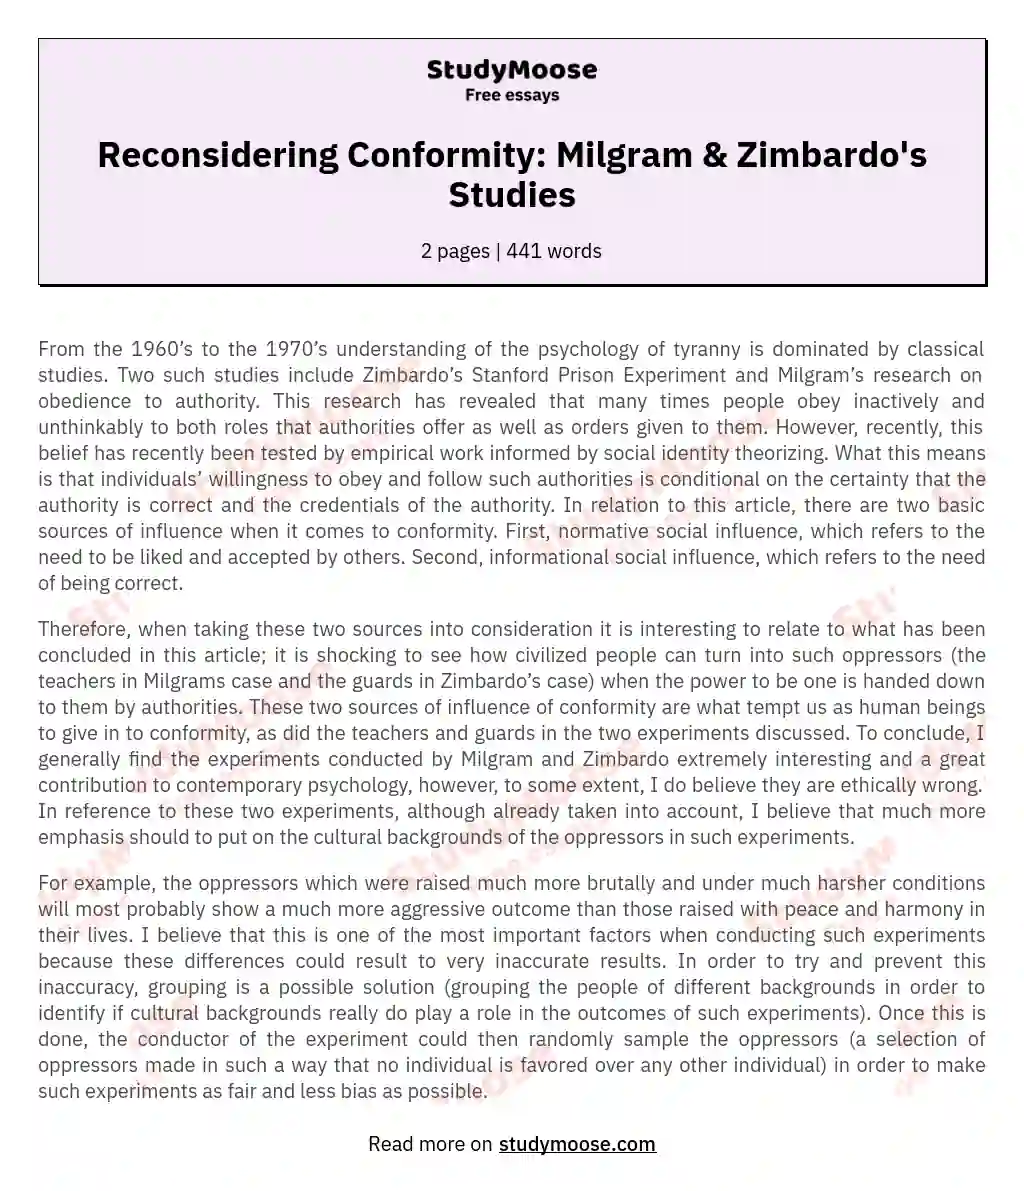 Contesting the “nature” of Conformity: What Milgram and Zimbardo’s Studies Really Show.